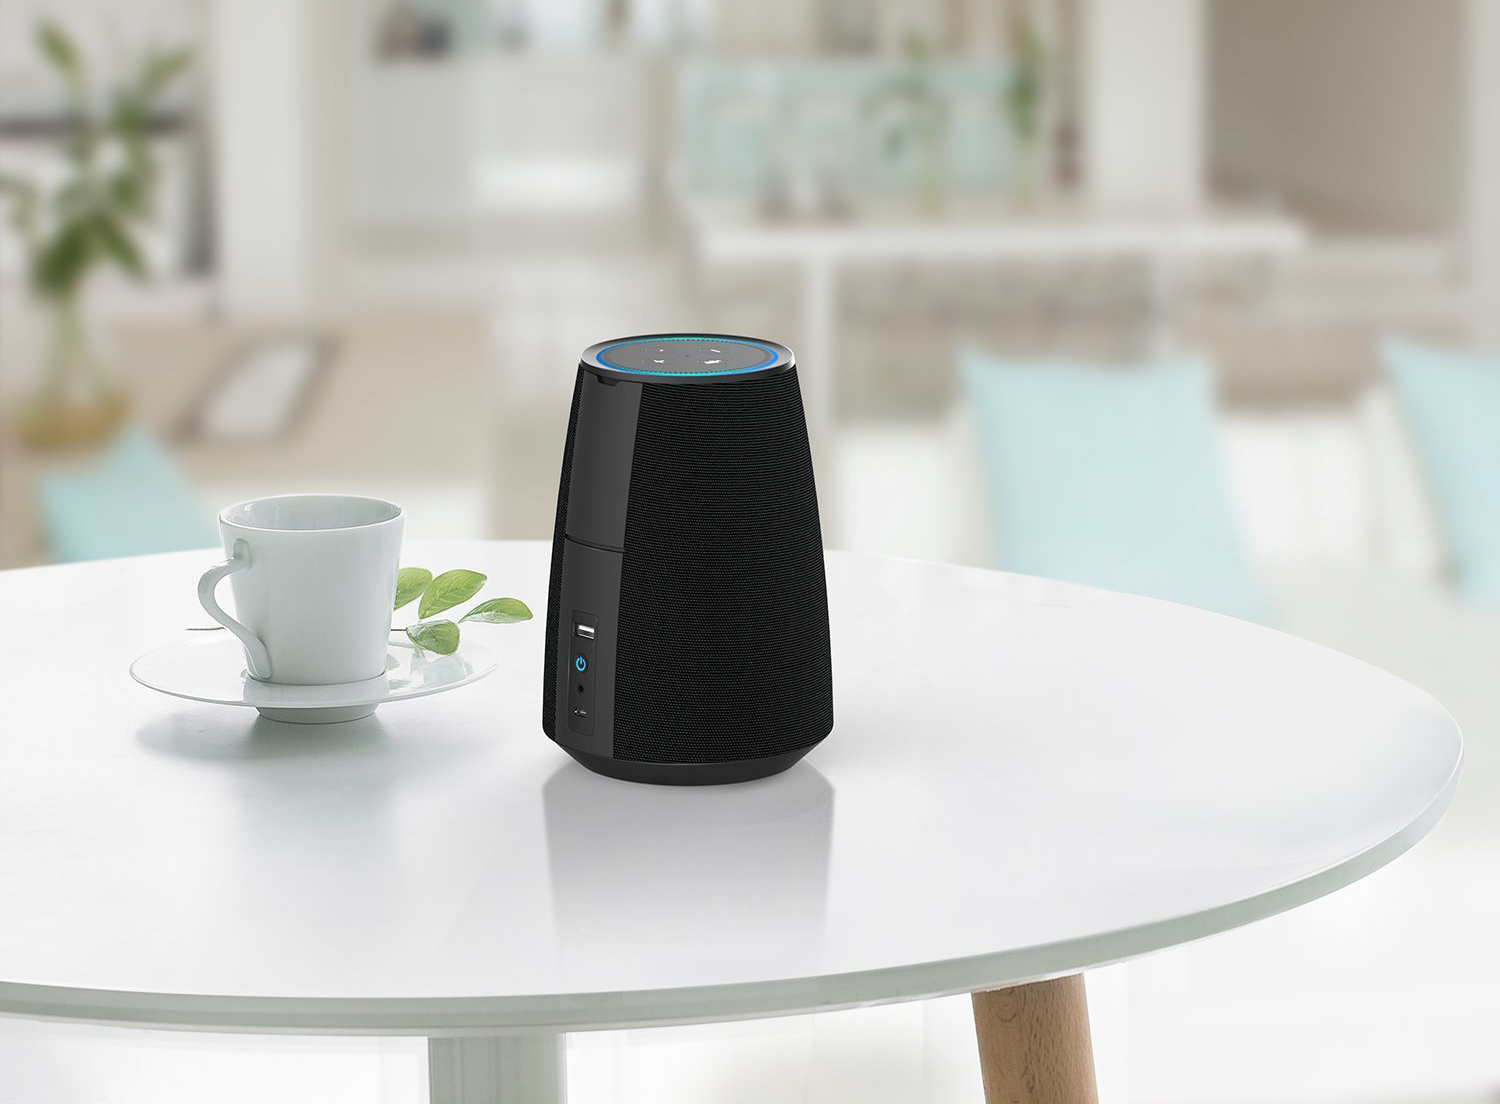 great speakers you could plug into the echo dot